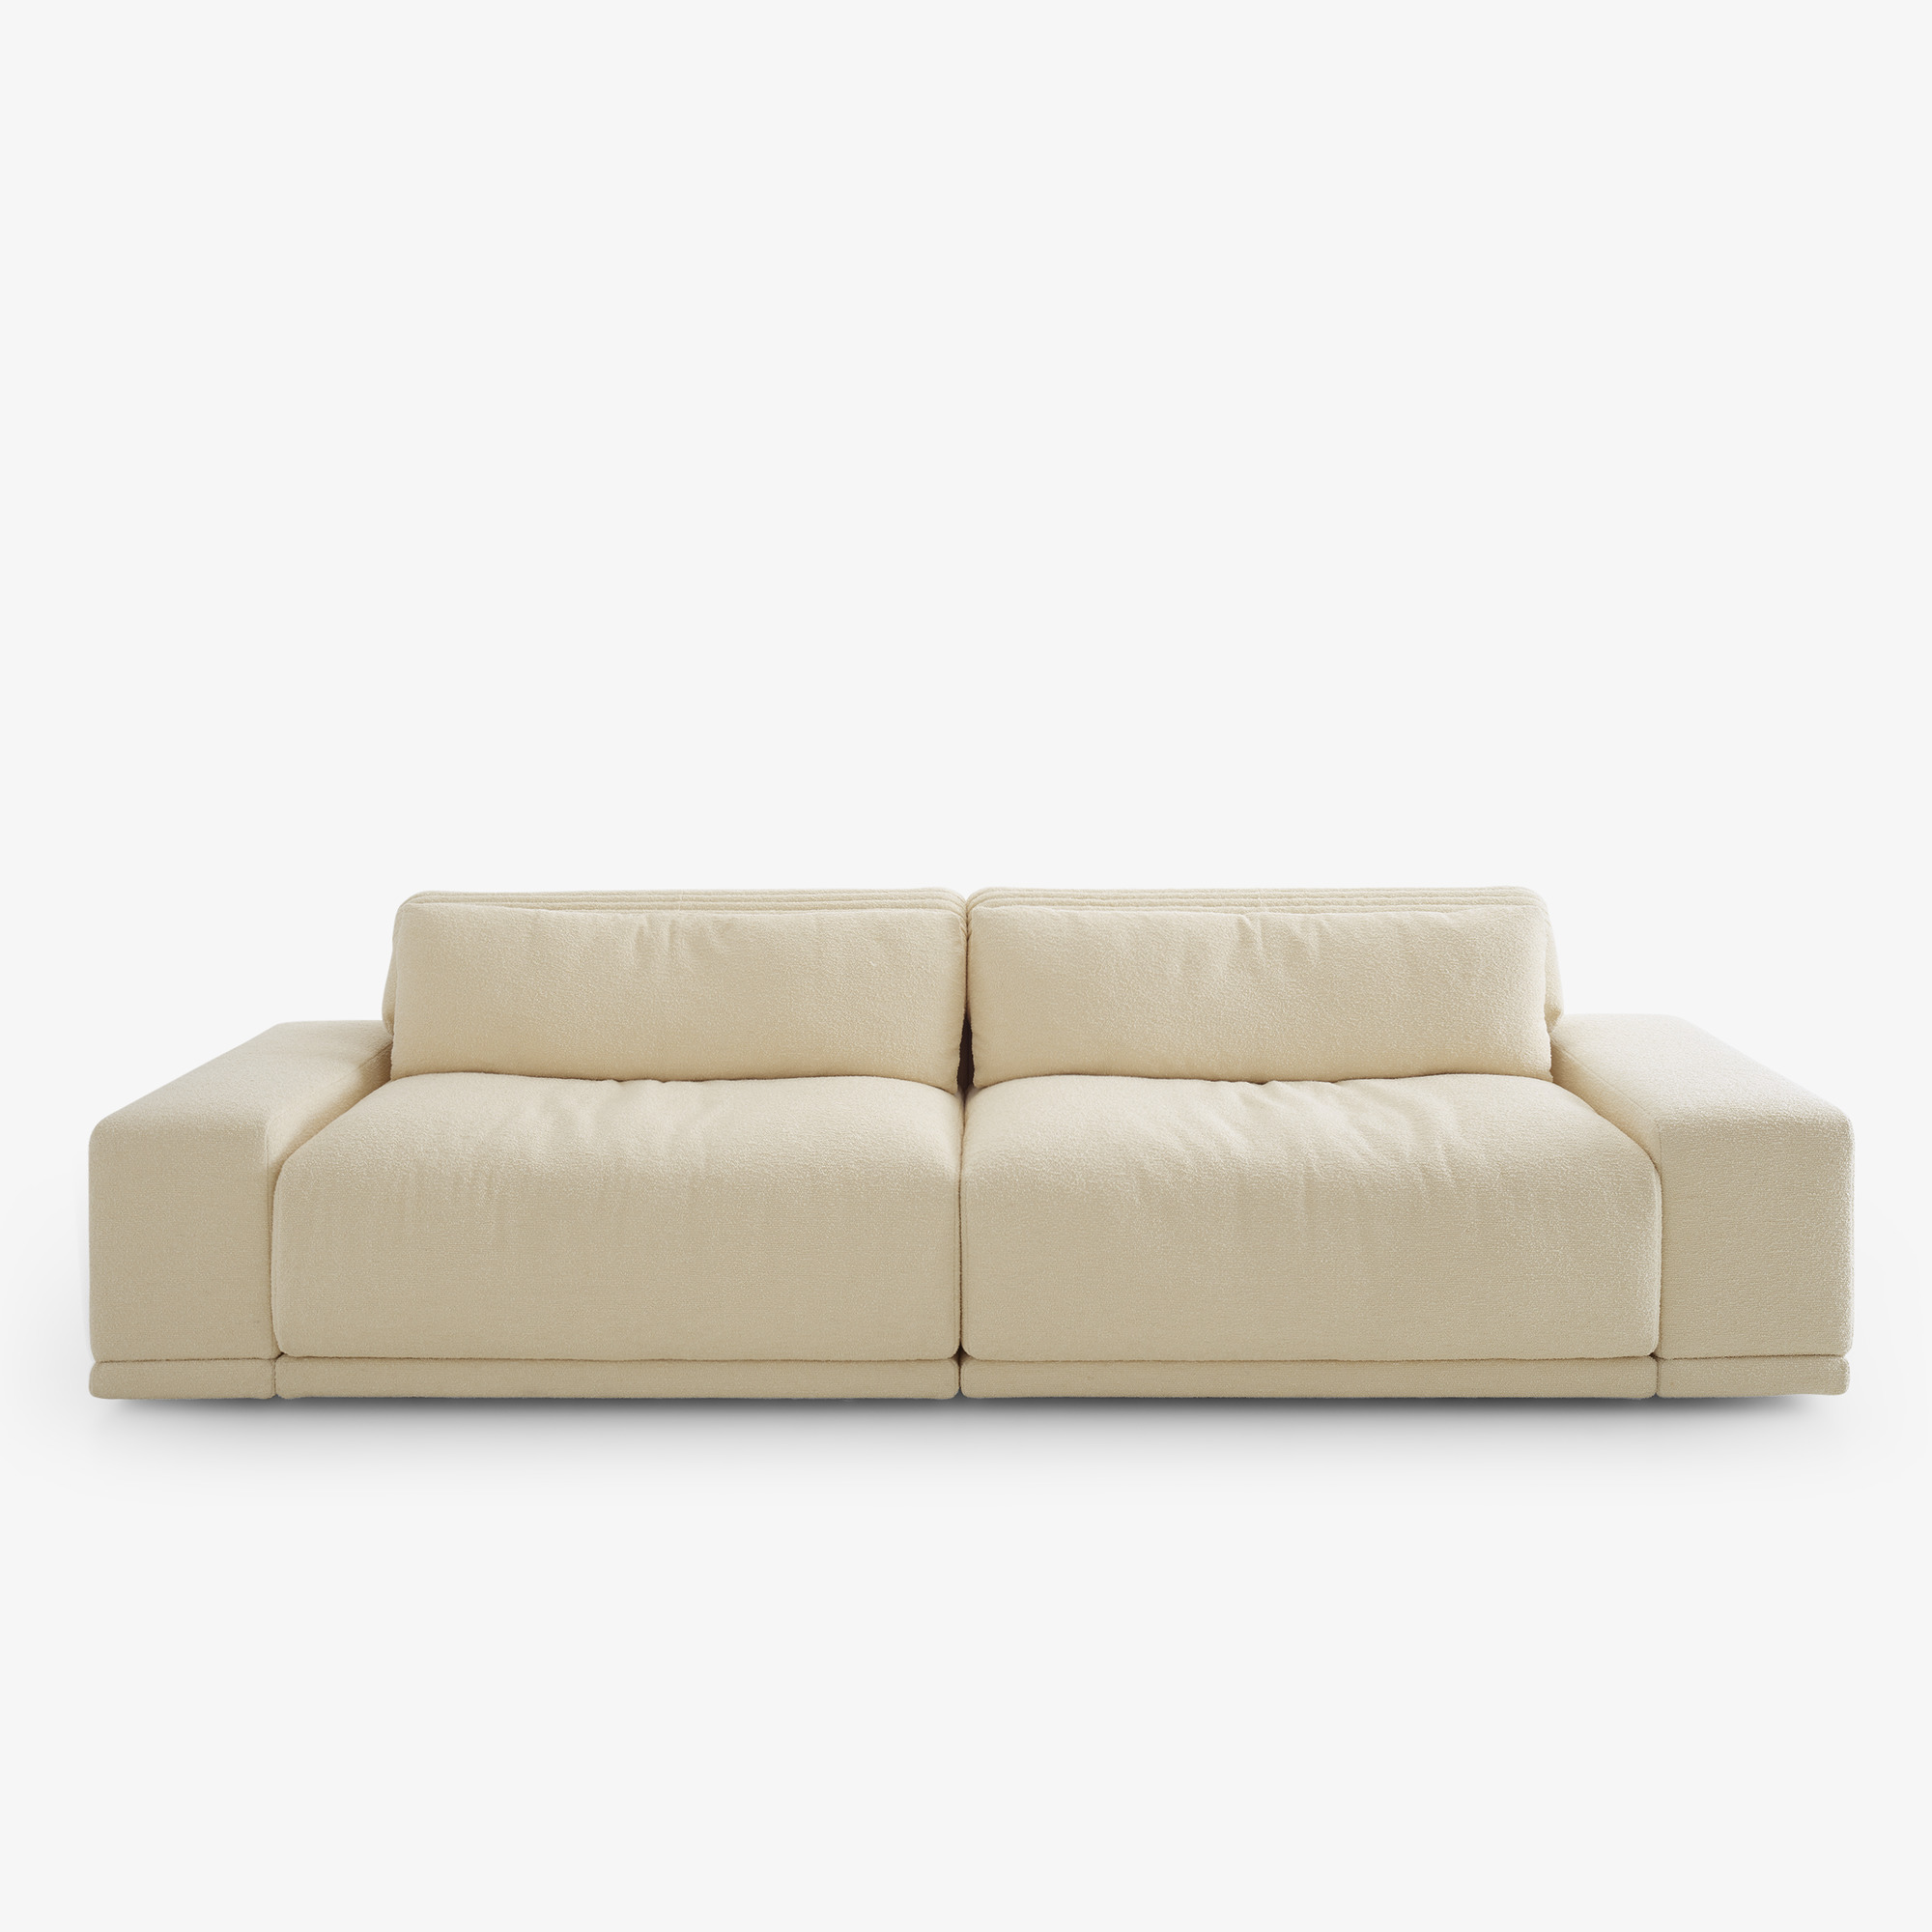 Image Large settee with broad armrest without lumbar cushion 6